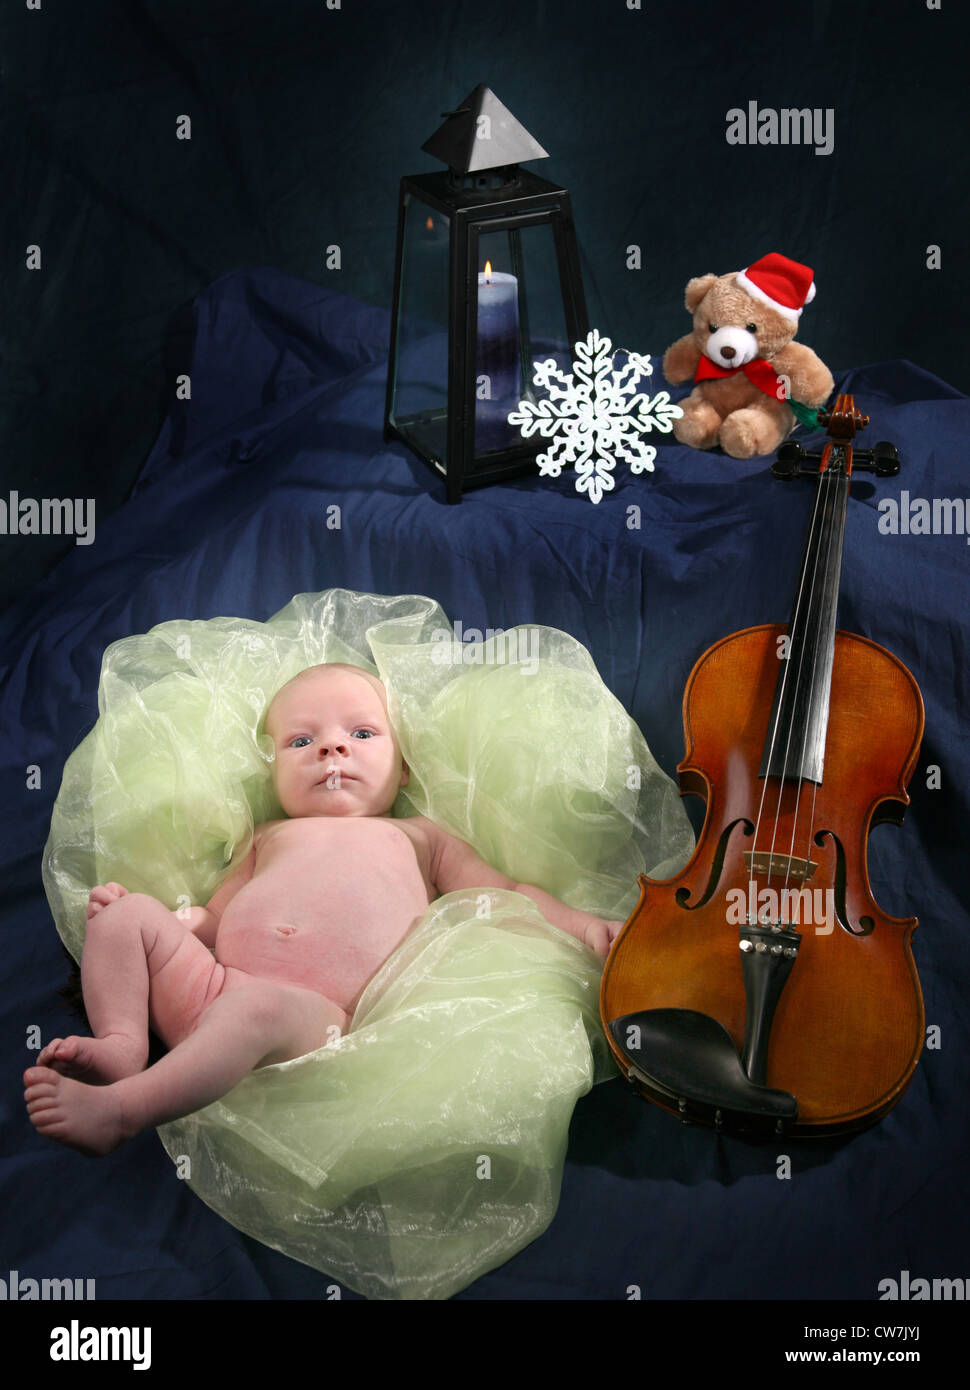 Christmas still life with baby Stock Photo